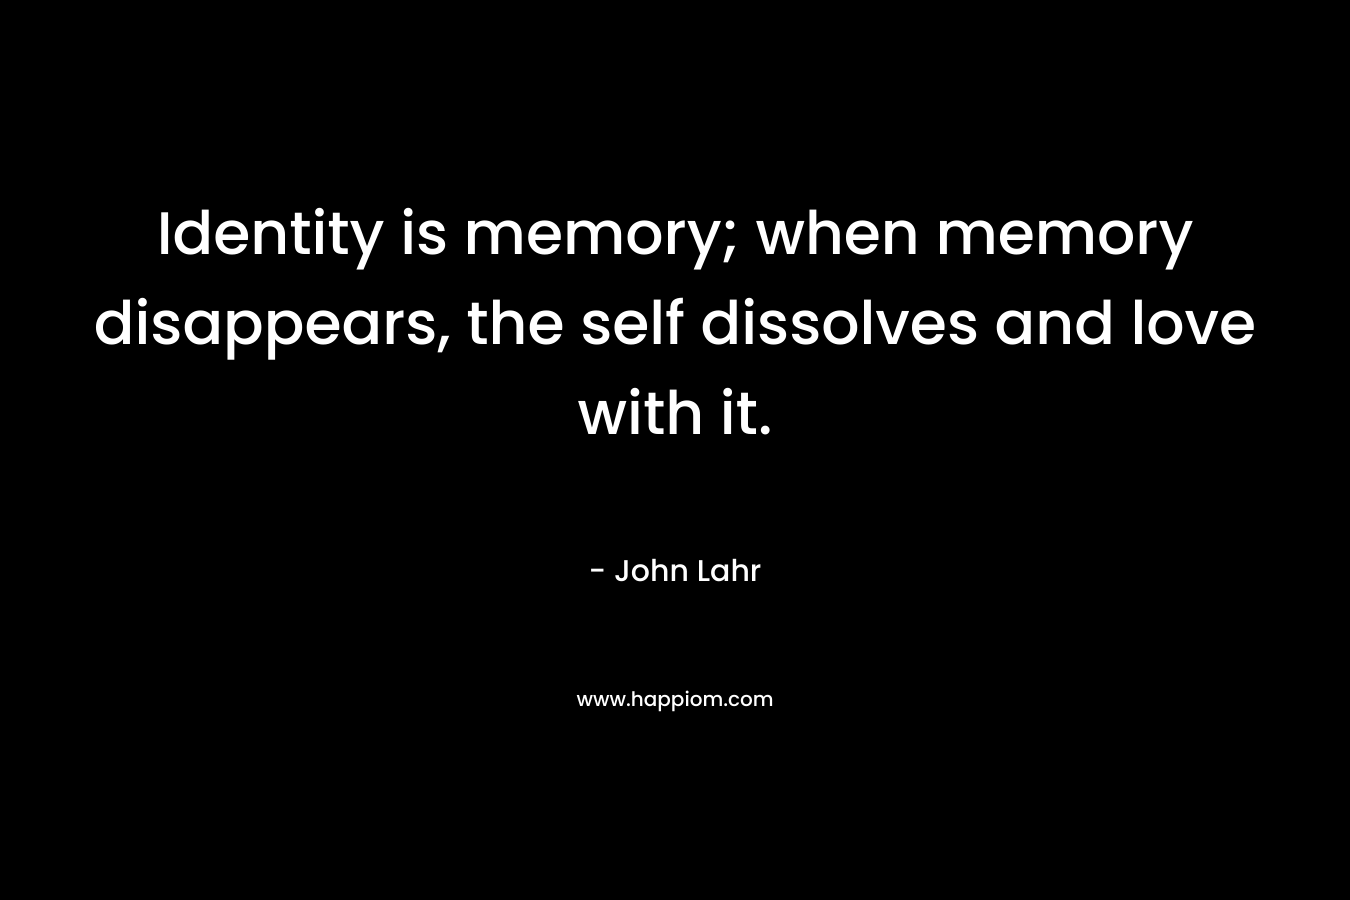 Identity is memory; when memory disappears, the self dissolves and love with it.